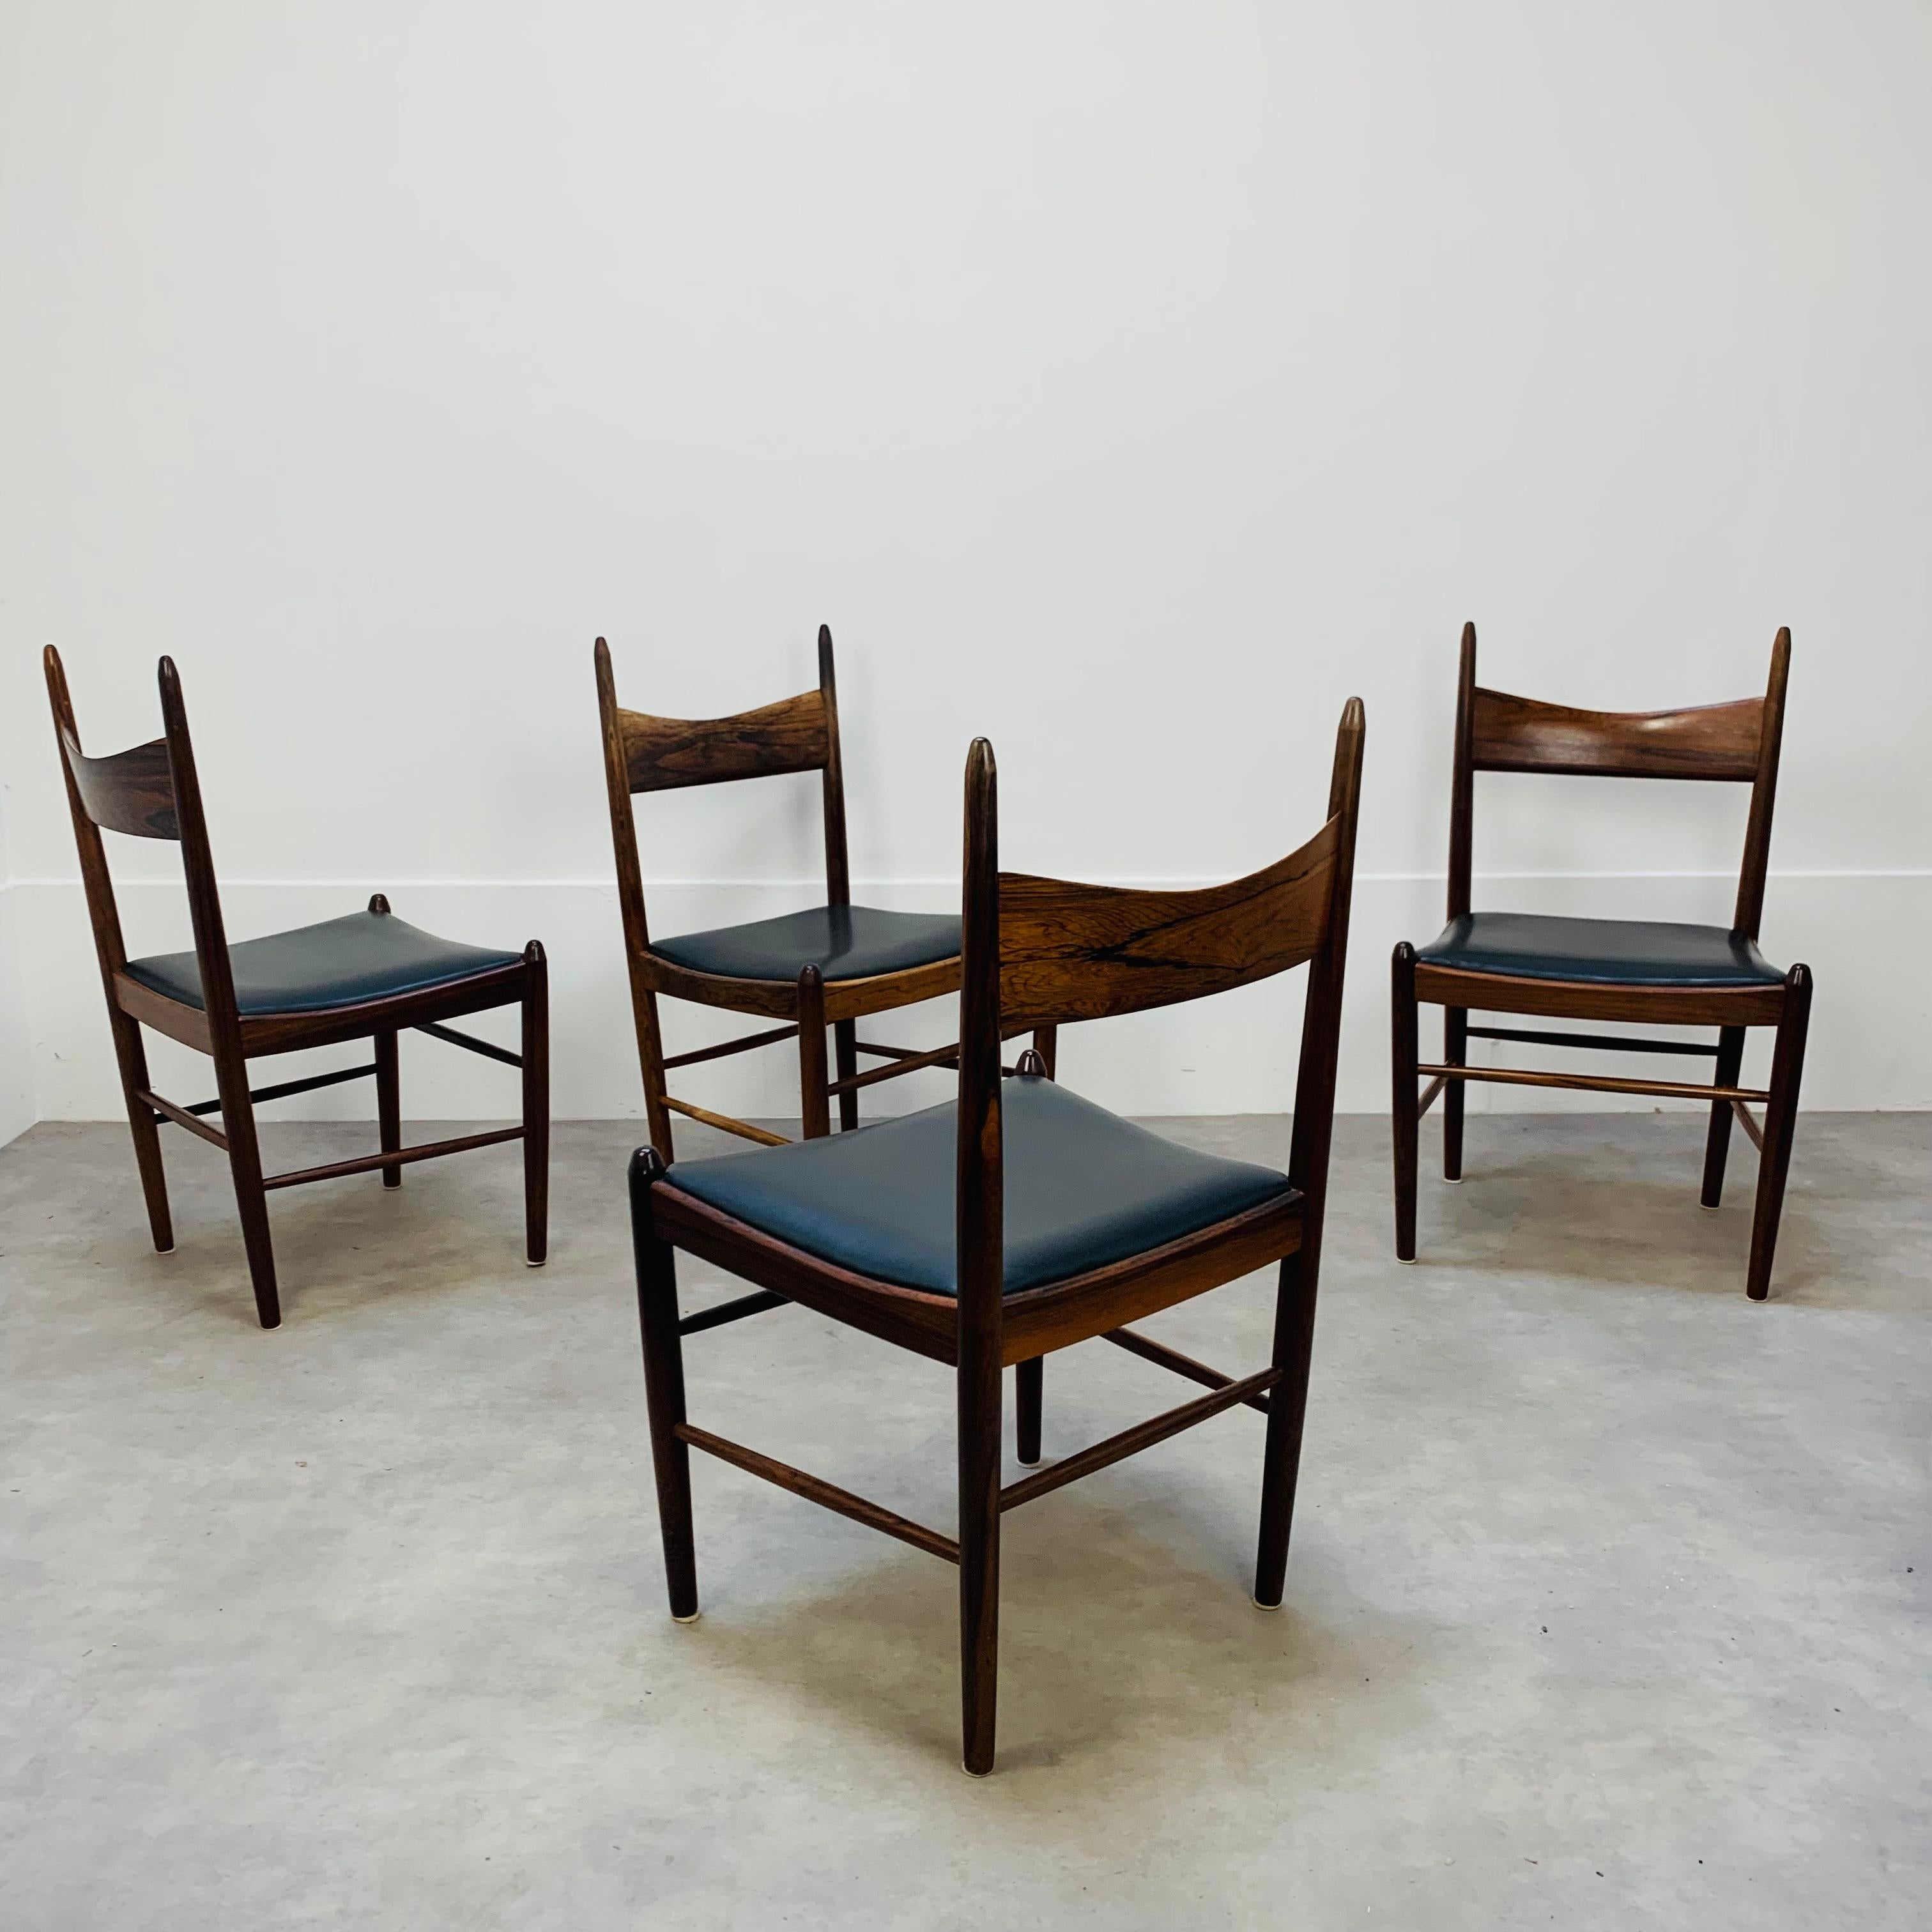 4 Scandinavian Rosewood Chairs by Vestervig Eriksen for Tomborg, 1960 For Sale 4